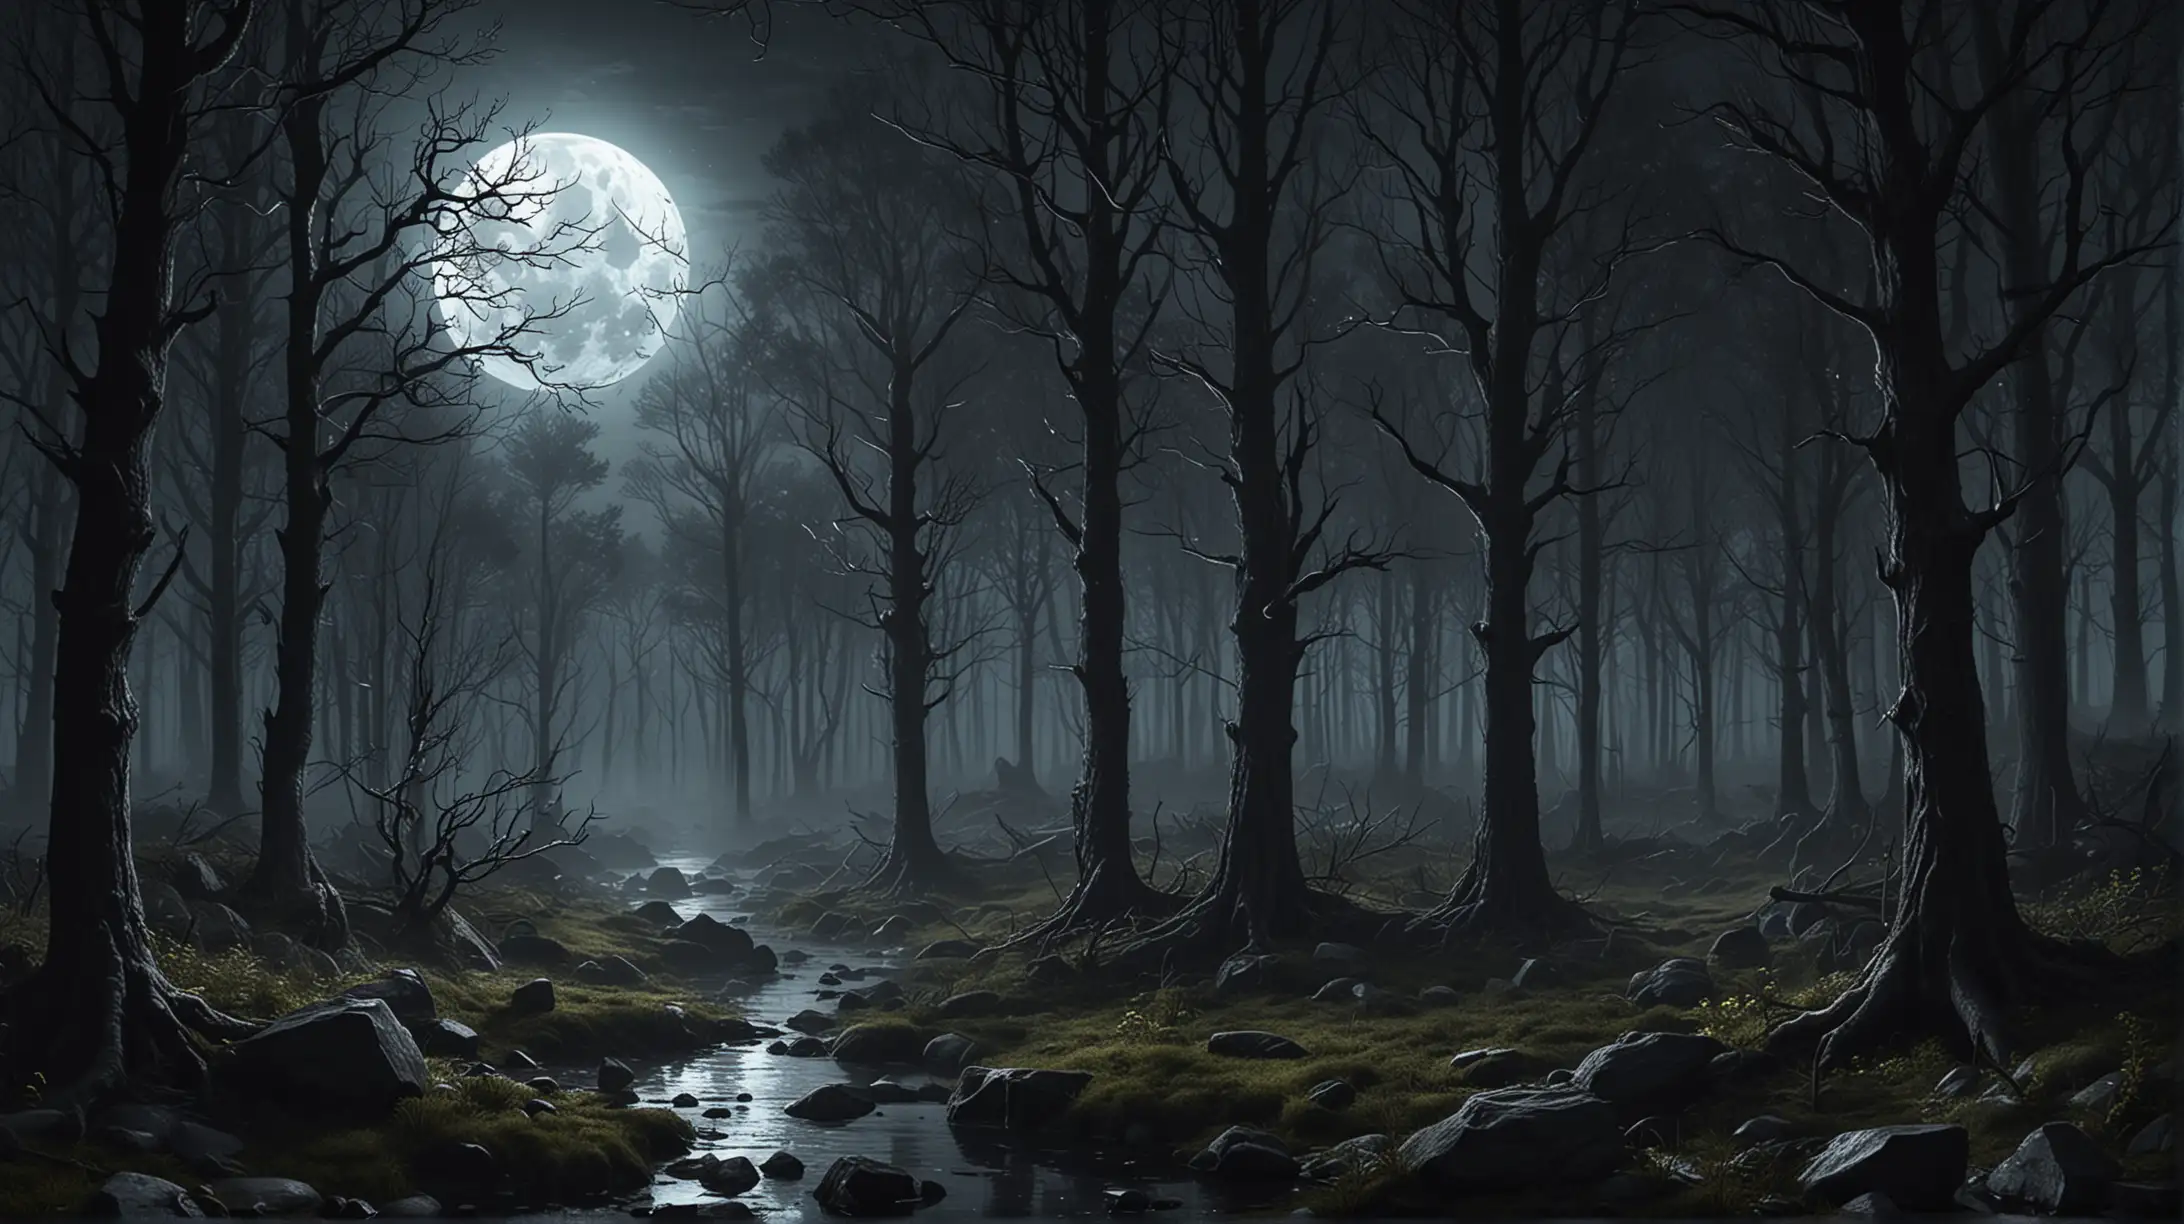 design a realistic scene of a dark mysterious forest under moonlight